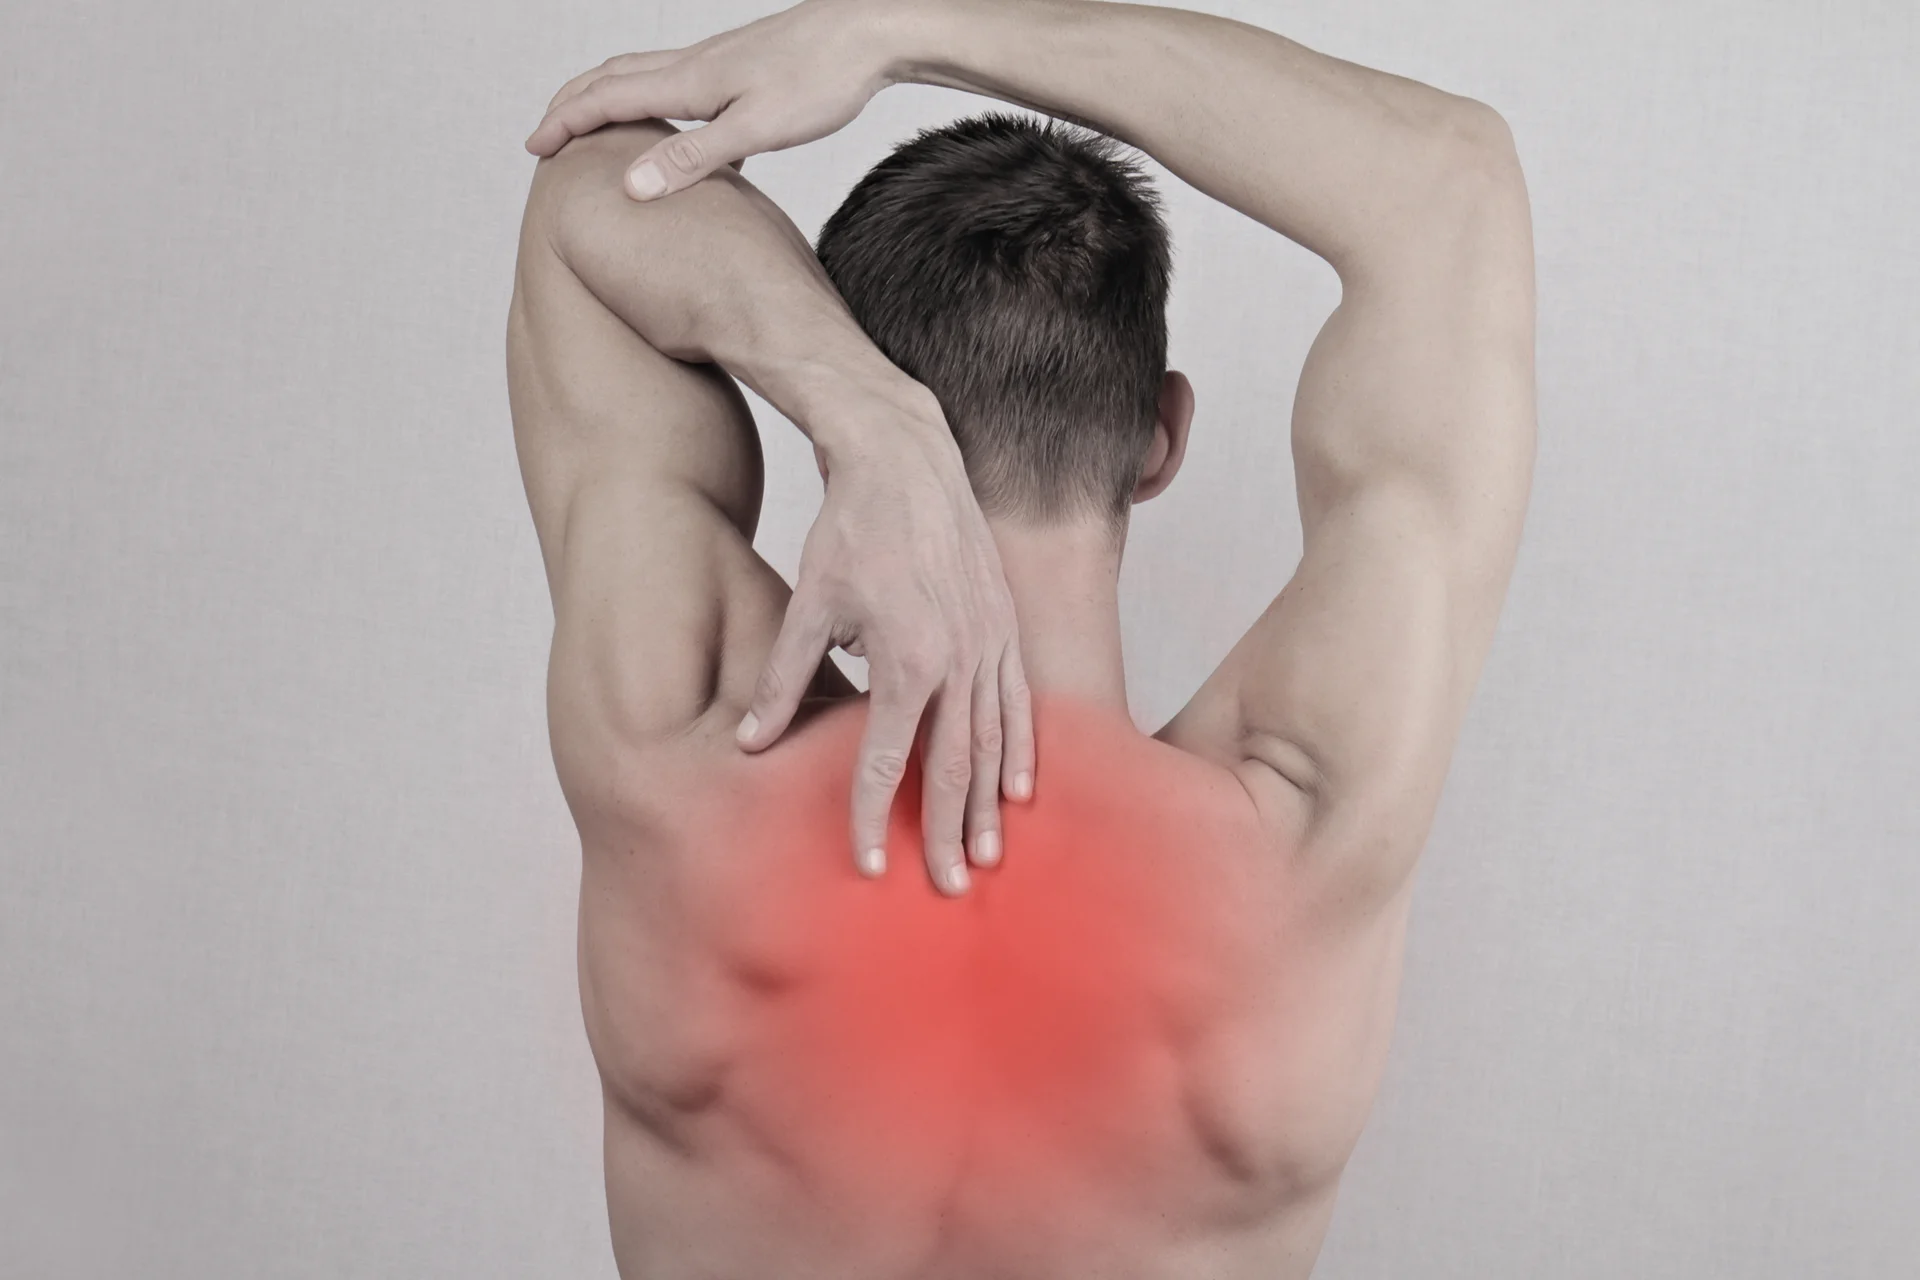 https://www.gramercypaincenter.com/wp-content/uploads/2023/03/is-it-normal-to-feel-upper-back-pain-after-running-featured.webp